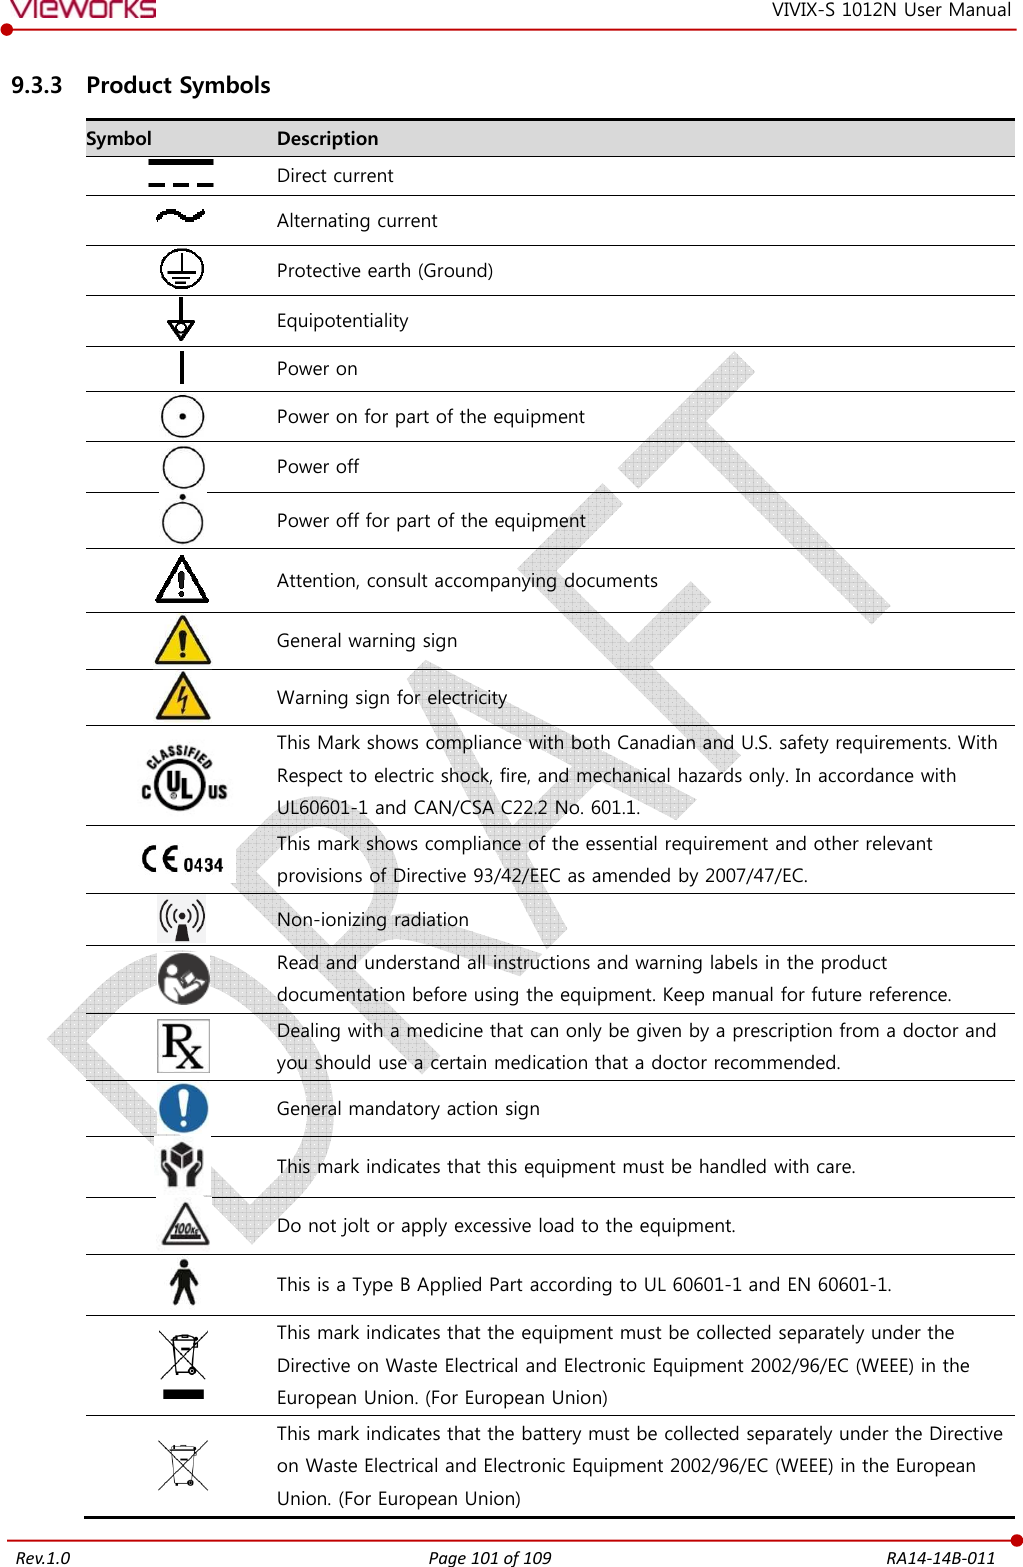   Rev.1.0 Page 101 of 109  RA14-14B-011 VIVIX-S 1012N User Manual 9.3.3 Product Symbols Symbol  Description  Direct current  Alternating current  Protective earth (Ground)  Equipotentiality  Power on  Power on for part of the equipment  Power off  Power off for part of the equipment  Attention, consult accompanying documents  General warning sign  Warning sign for electricity  This Mark shows compliance with both Canadian and U.S. safety requirements. With Respect to electric shock, fire, and mechanical hazards only. In accordance with UL60601-1 and CAN/CSA C22.2 No. 601.1.  This mark shows compliance of the essential requirement and other relevant provisions of Directive 93/42/EEC as amended by 2007/47/EC.  Non-ionizing radiation  Read and understand all instructions and warning labels in the product documentation before using the equipment. Keep manual for future reference.  Dealing with a medicine that can only be given by a prescription from a doctor and you should use a certain medication that a doctor recommended.  General mandatory action sign  This mark indicates that this equipment must be handled with care.  Do not jolt or apply excessive load to the equipment.  This is a Type B Applied Part according to UL 60601-1 and EN 60601-1.  This mark indicates that the equipment must be collected separately under the Directive on Waste Electrical and Electronic Equipment 2002/96/EC (WEEE) in the European Union. (For European Union)  This mark indicates that the battery must be collected separately under the Directive on Waste Electrical and Electronic Equipment 2002/96/EC (WEEE) in the European Union. (For European Union) 